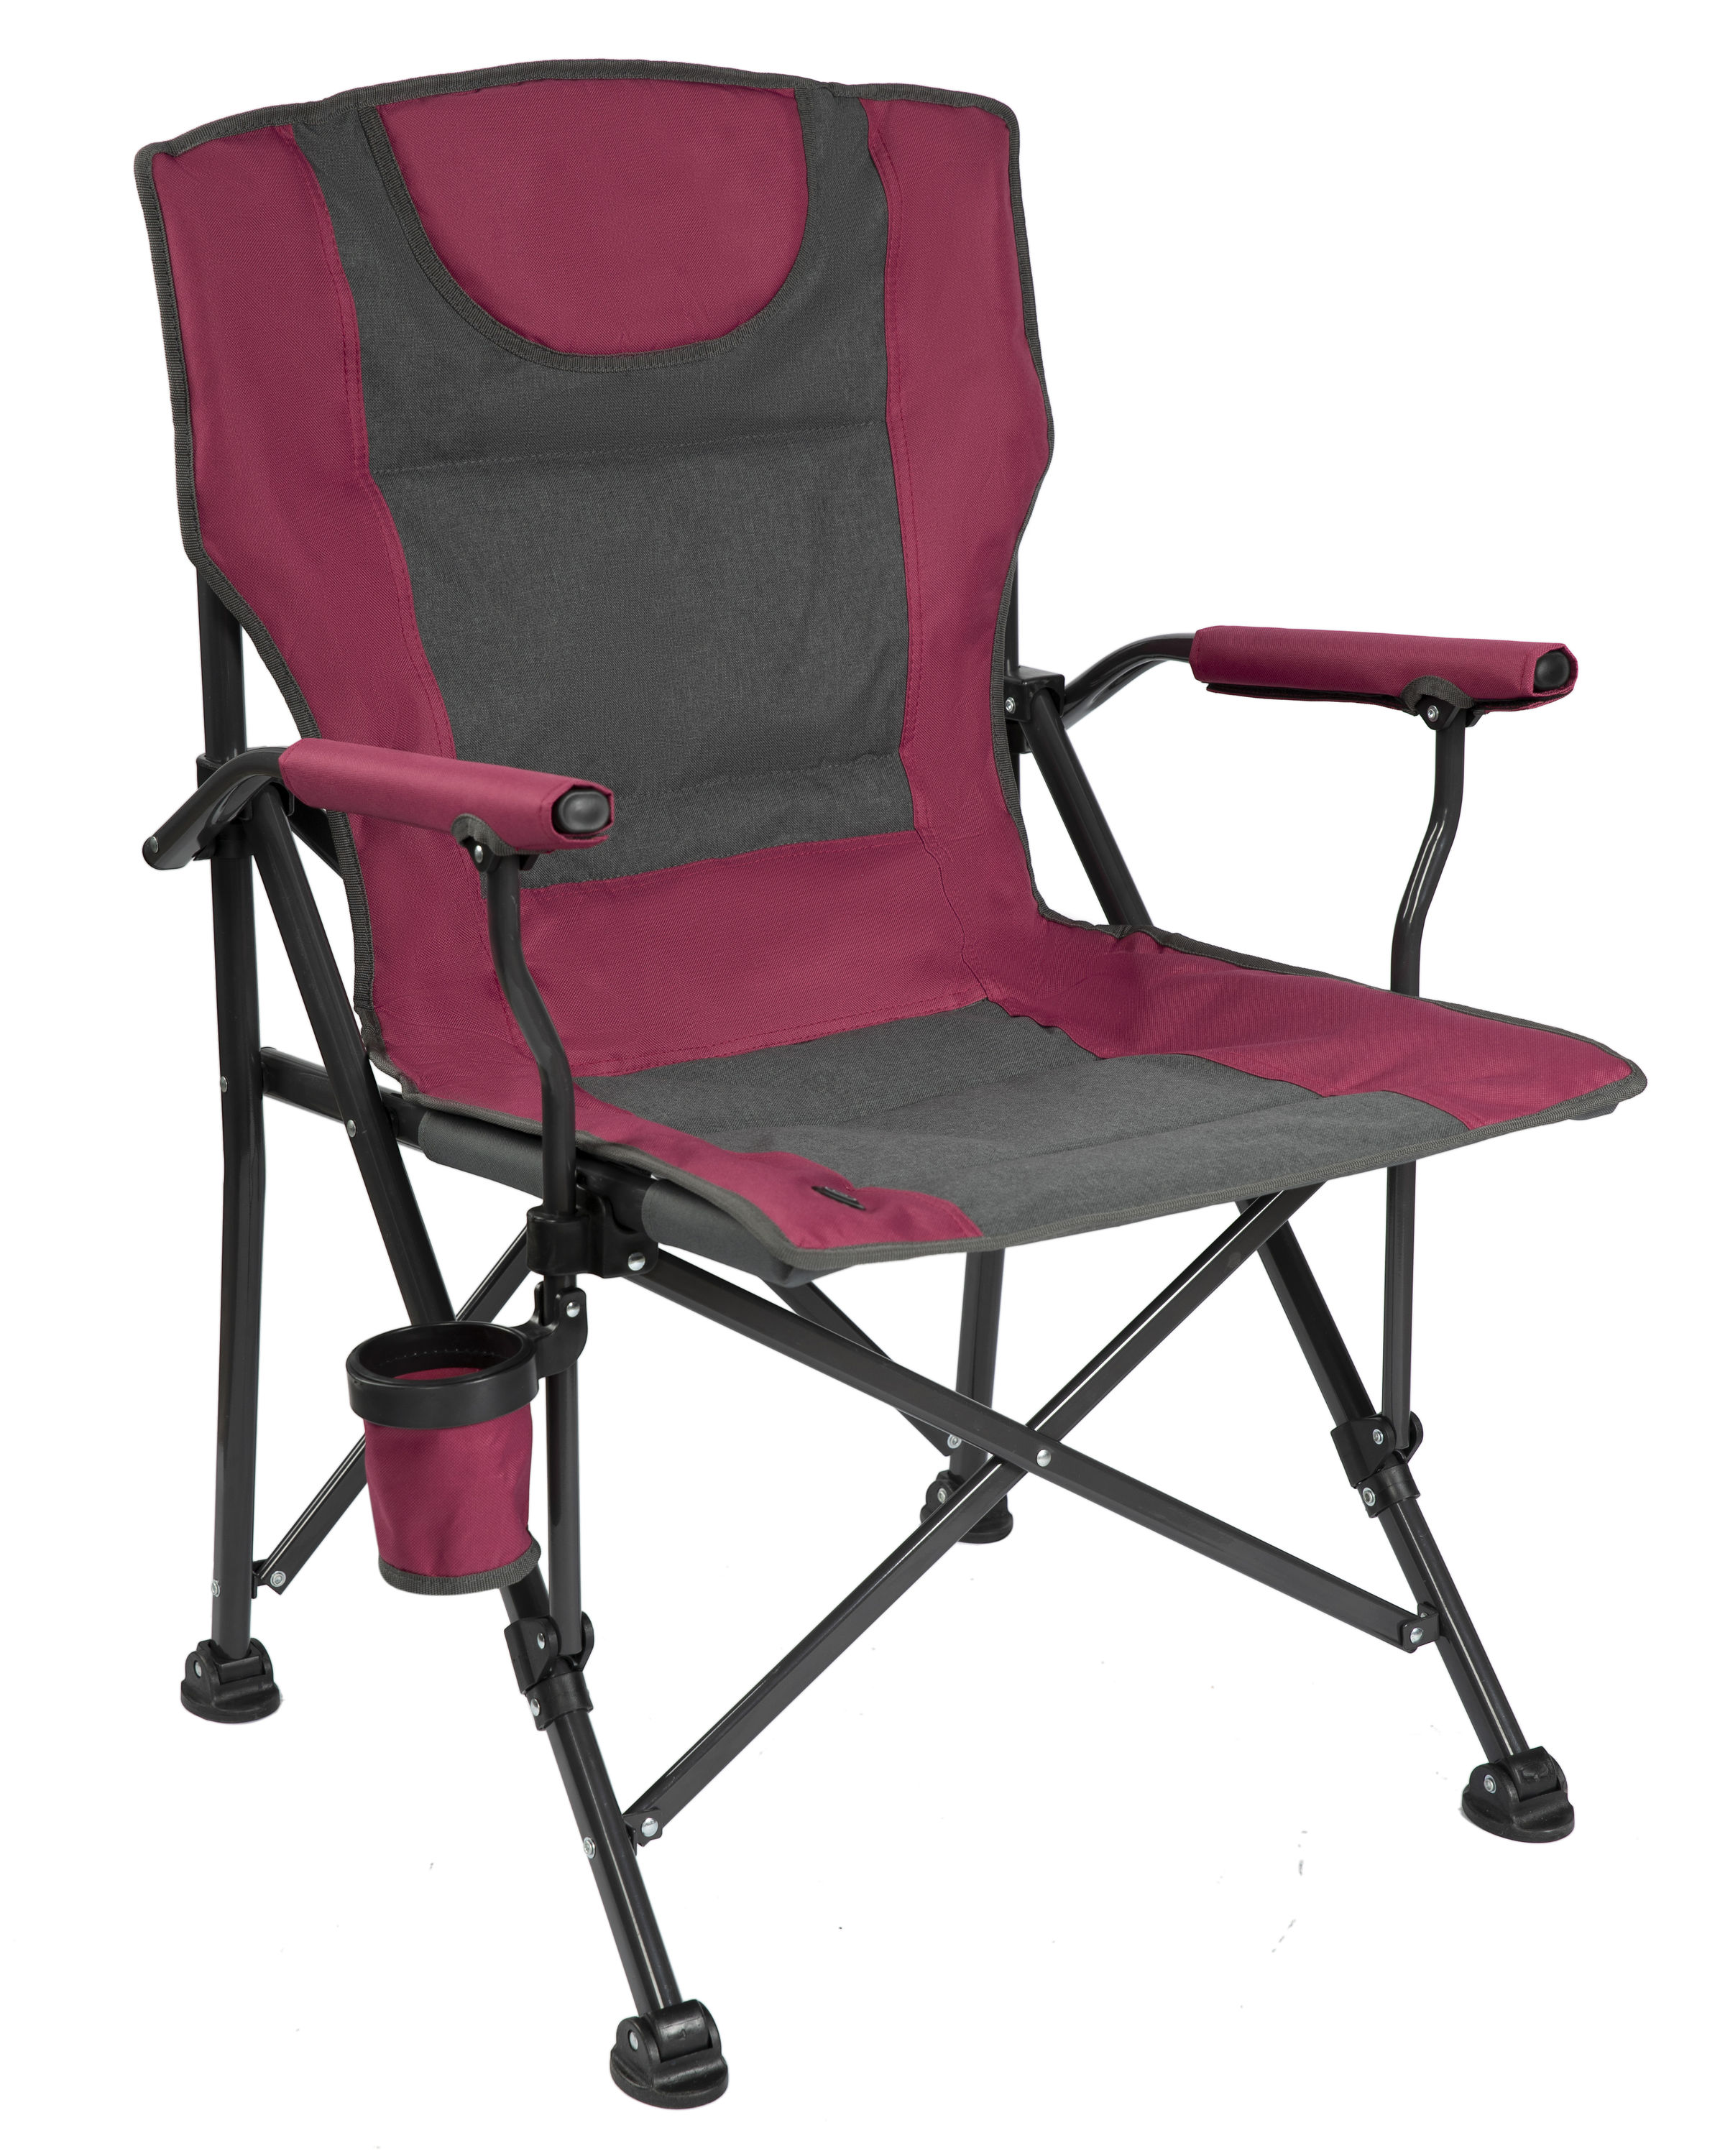 Fishing Chairs,Folding Chair Fishing,Portable Heavy Duty Stainless Steel  Frame Foldable Fishing Chairs for Adults,Camping Chairs with Pocket :  : Automotive